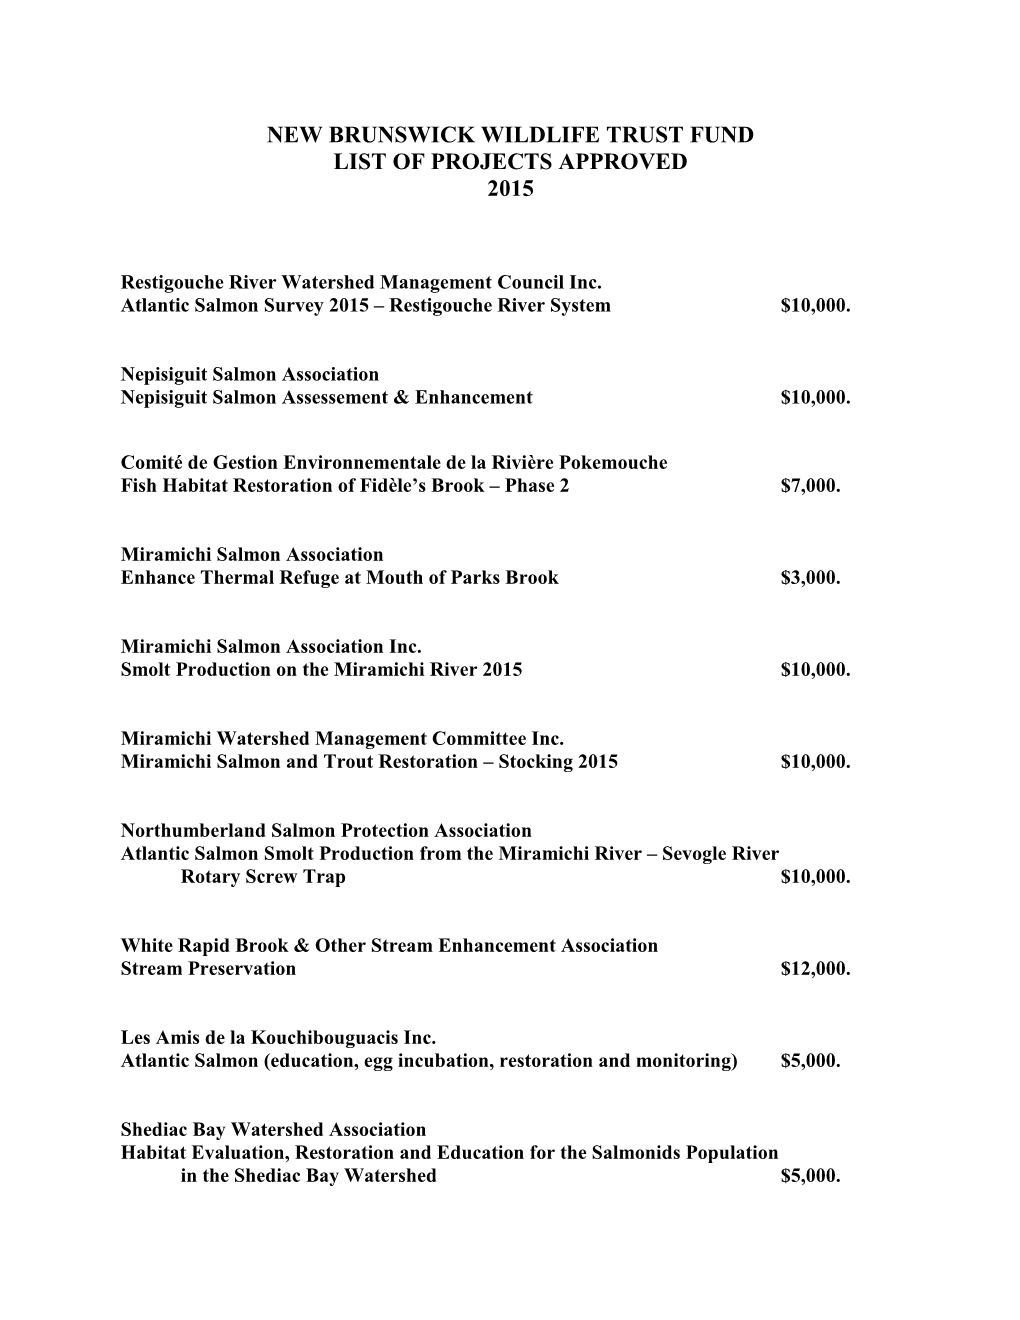 List of Projects Approved 2015